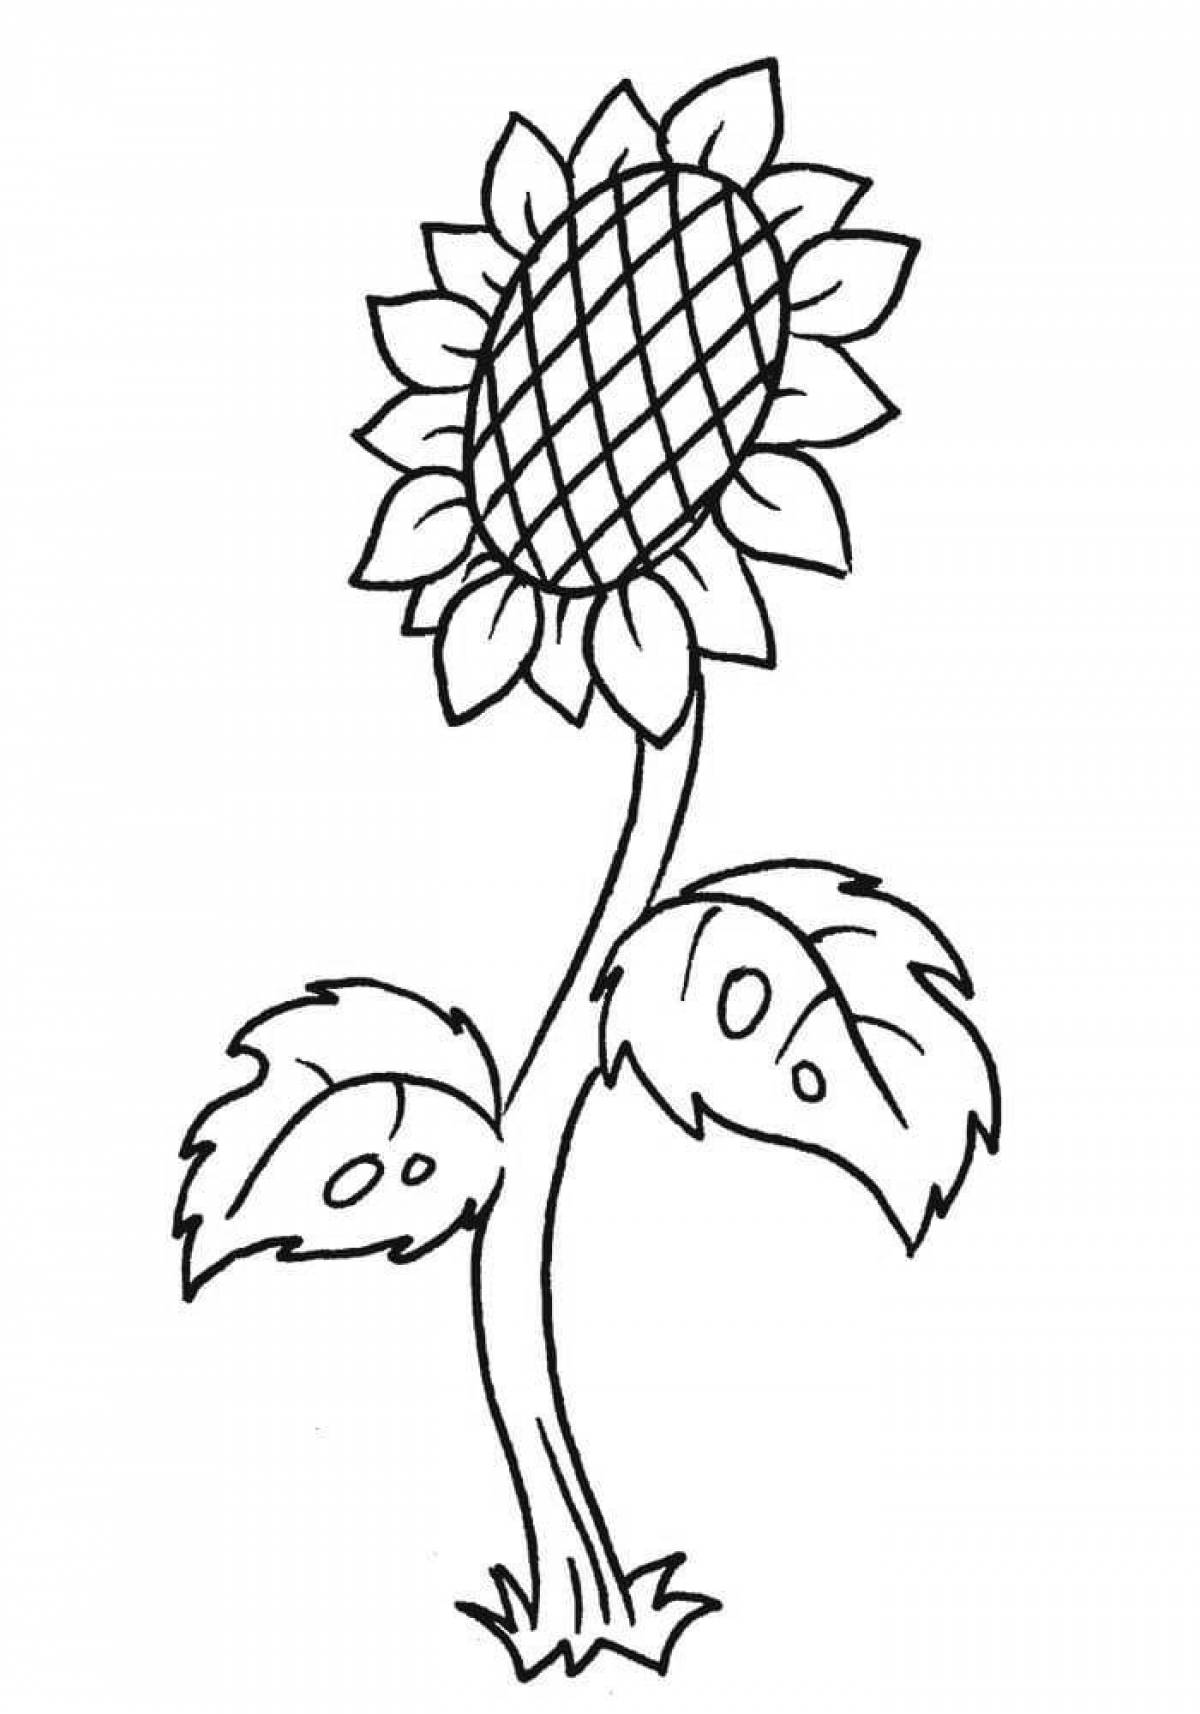 Relaxing sunflower coloring book for kids